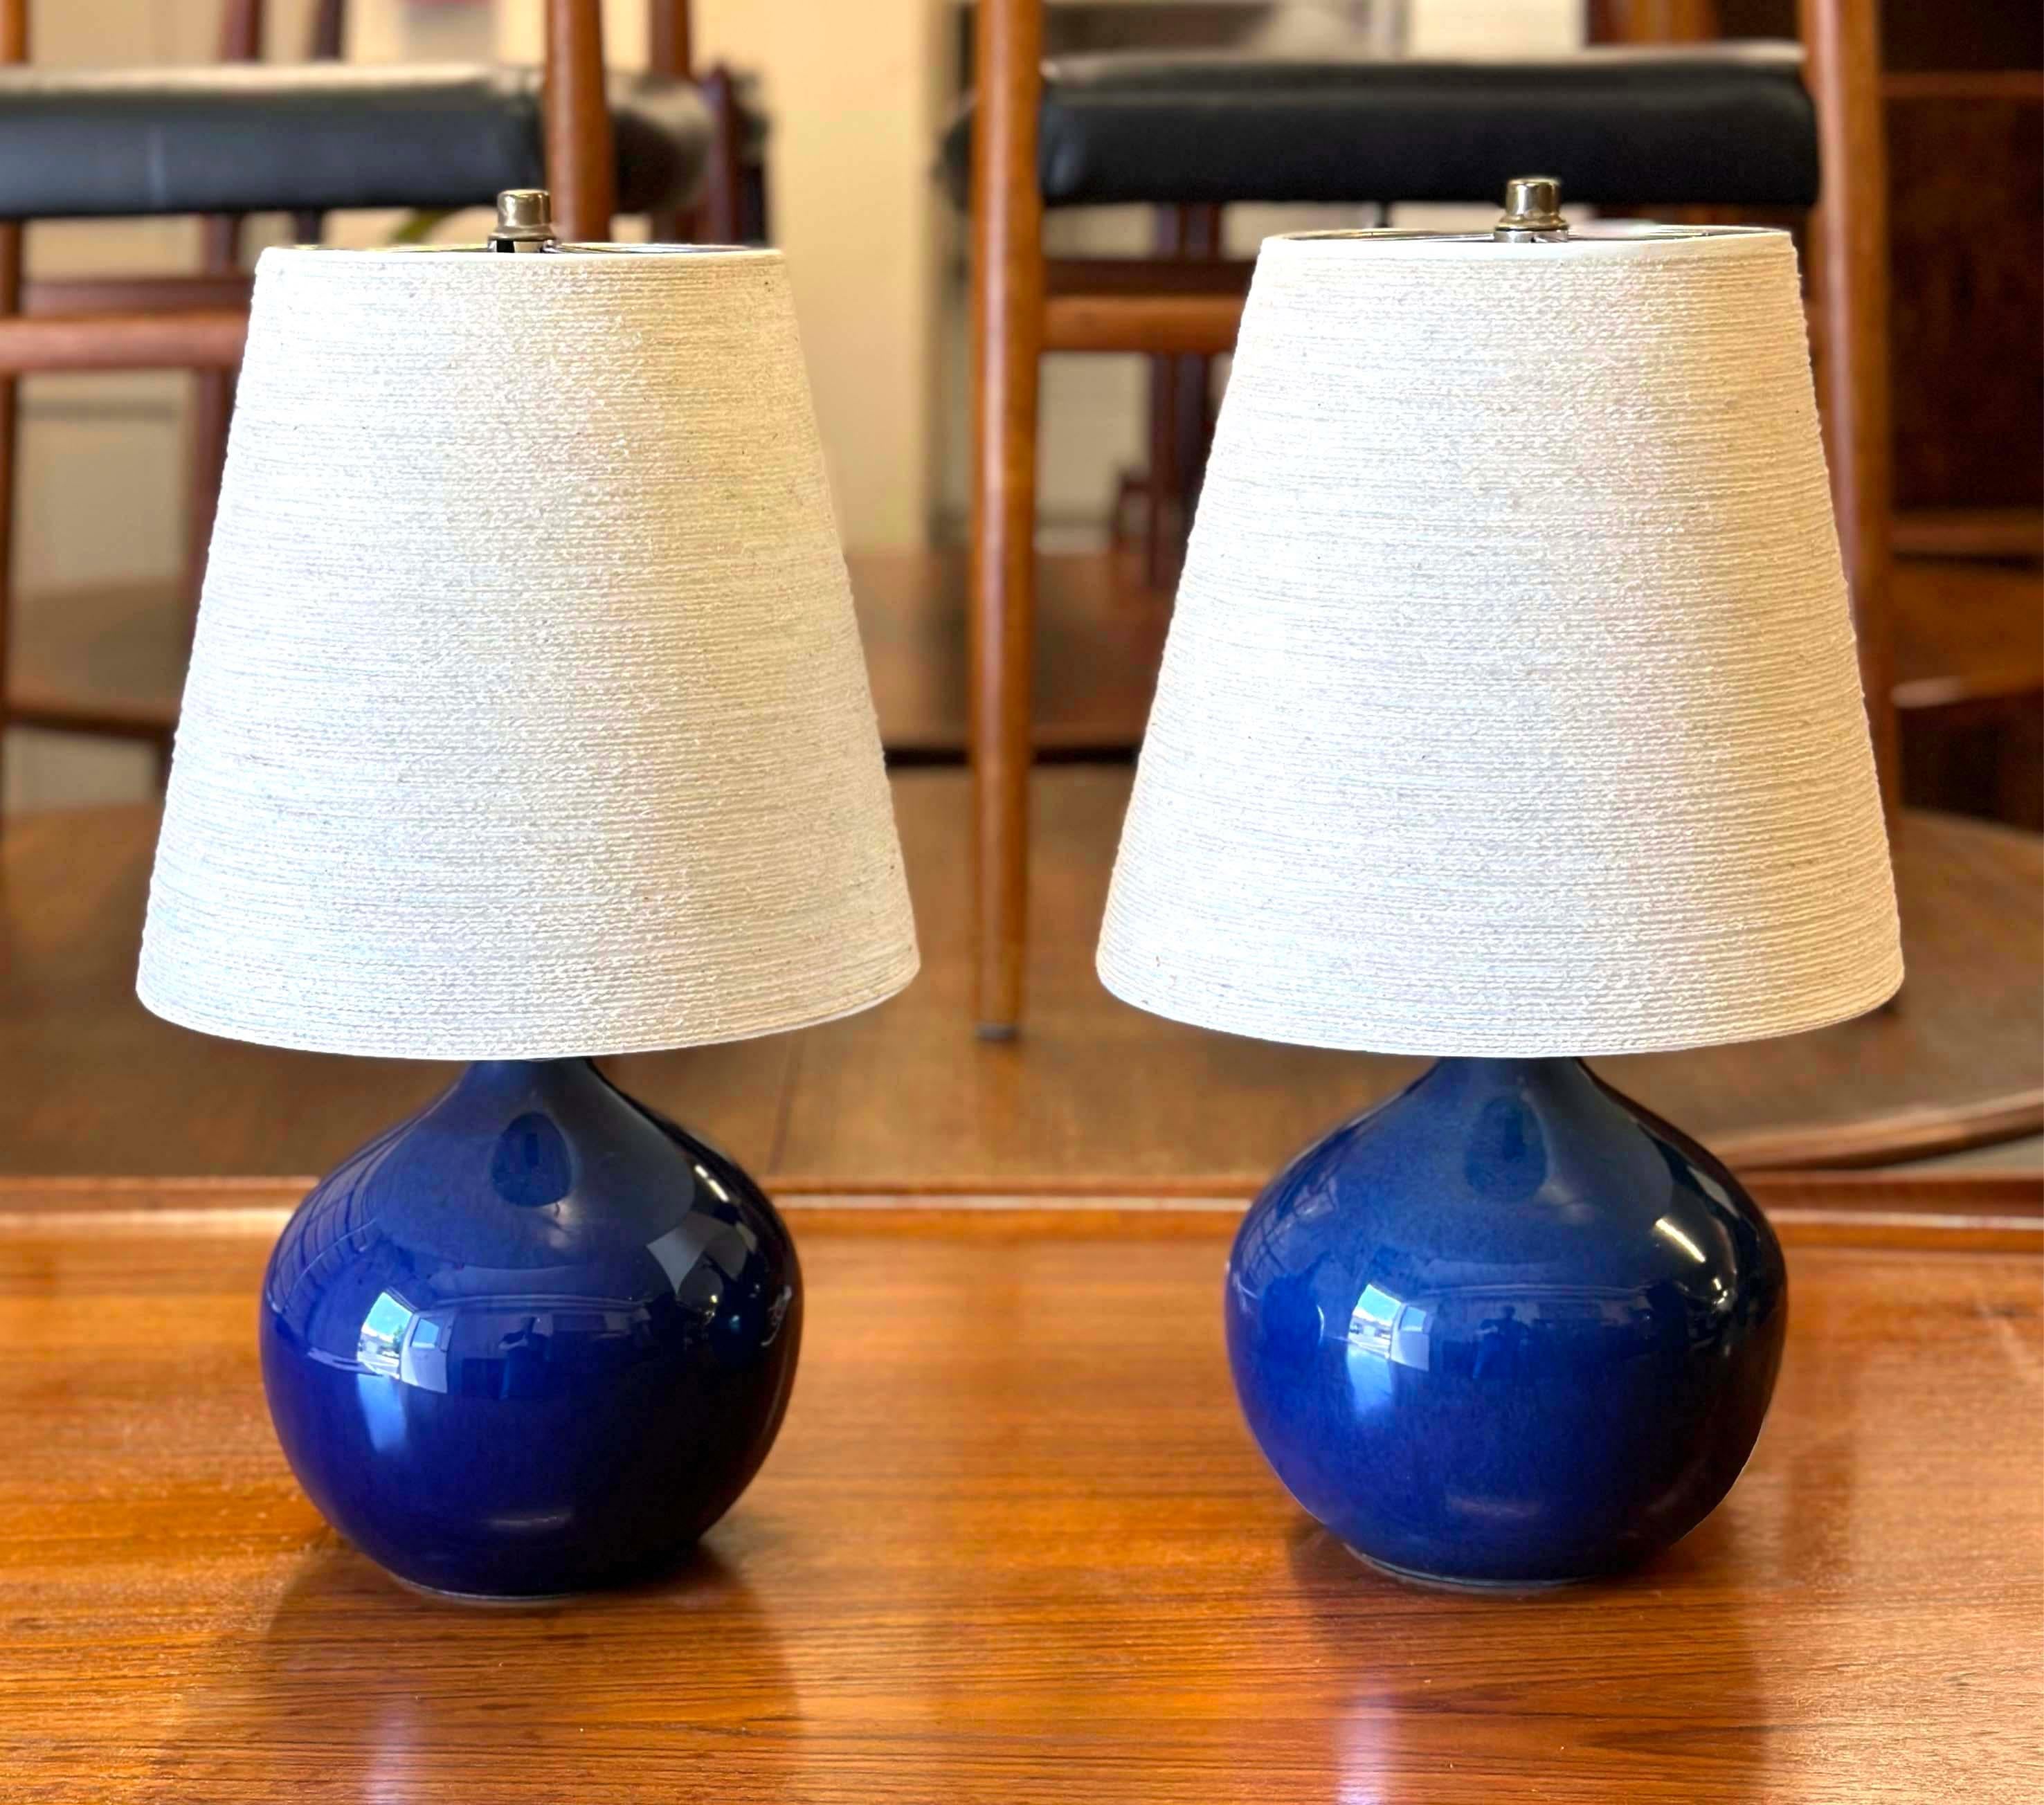 Canadian Lotte and Gunnar Bostlund Pair of Iridescent Royal Blue Ceramic Lamps For Sale